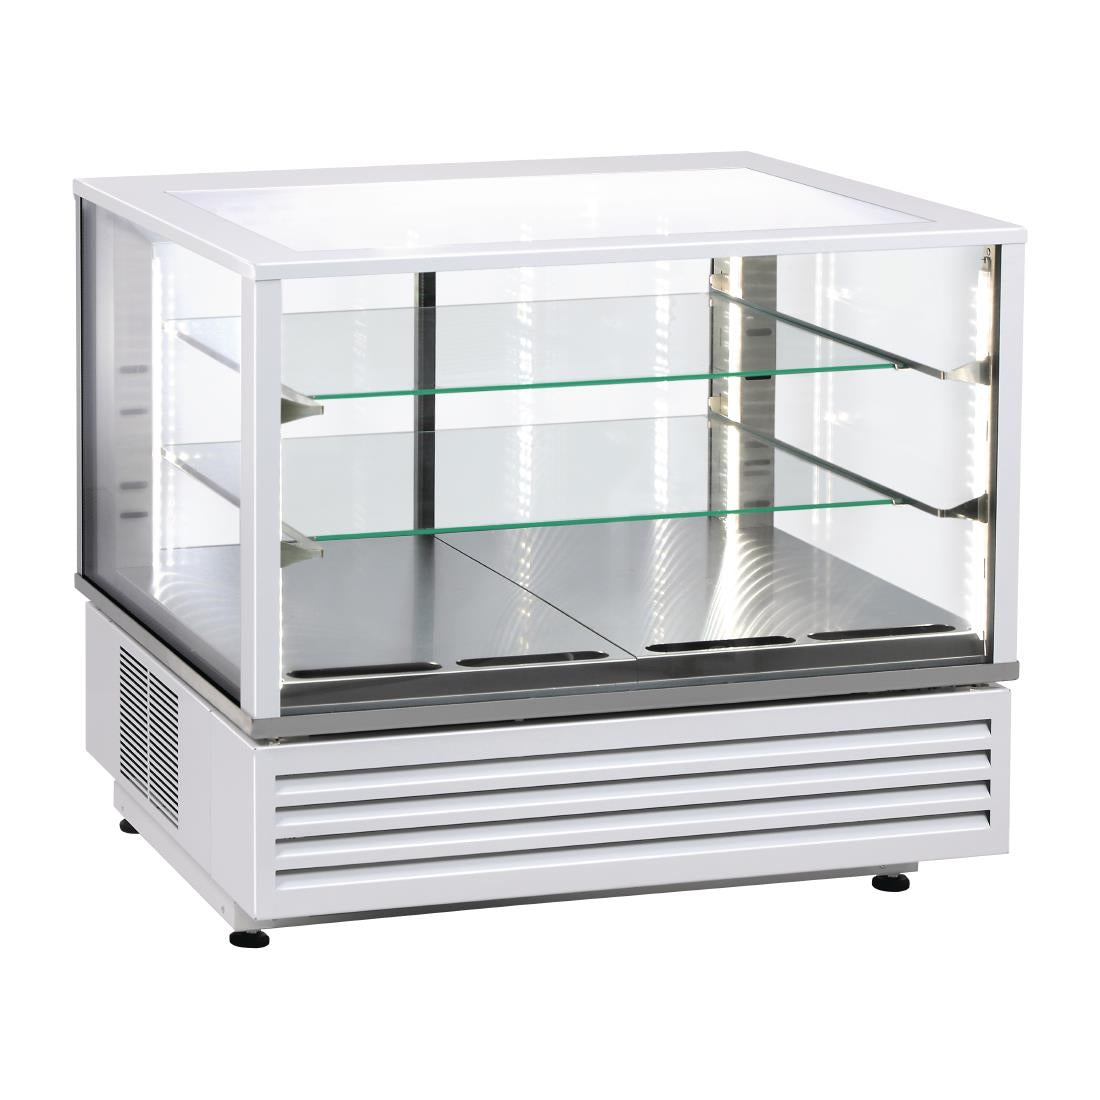 DH787 Roller Grill Countertop Chocolate Display Fridge White 800mm CDC800 W JD Catering Equipment Solutions Ltd